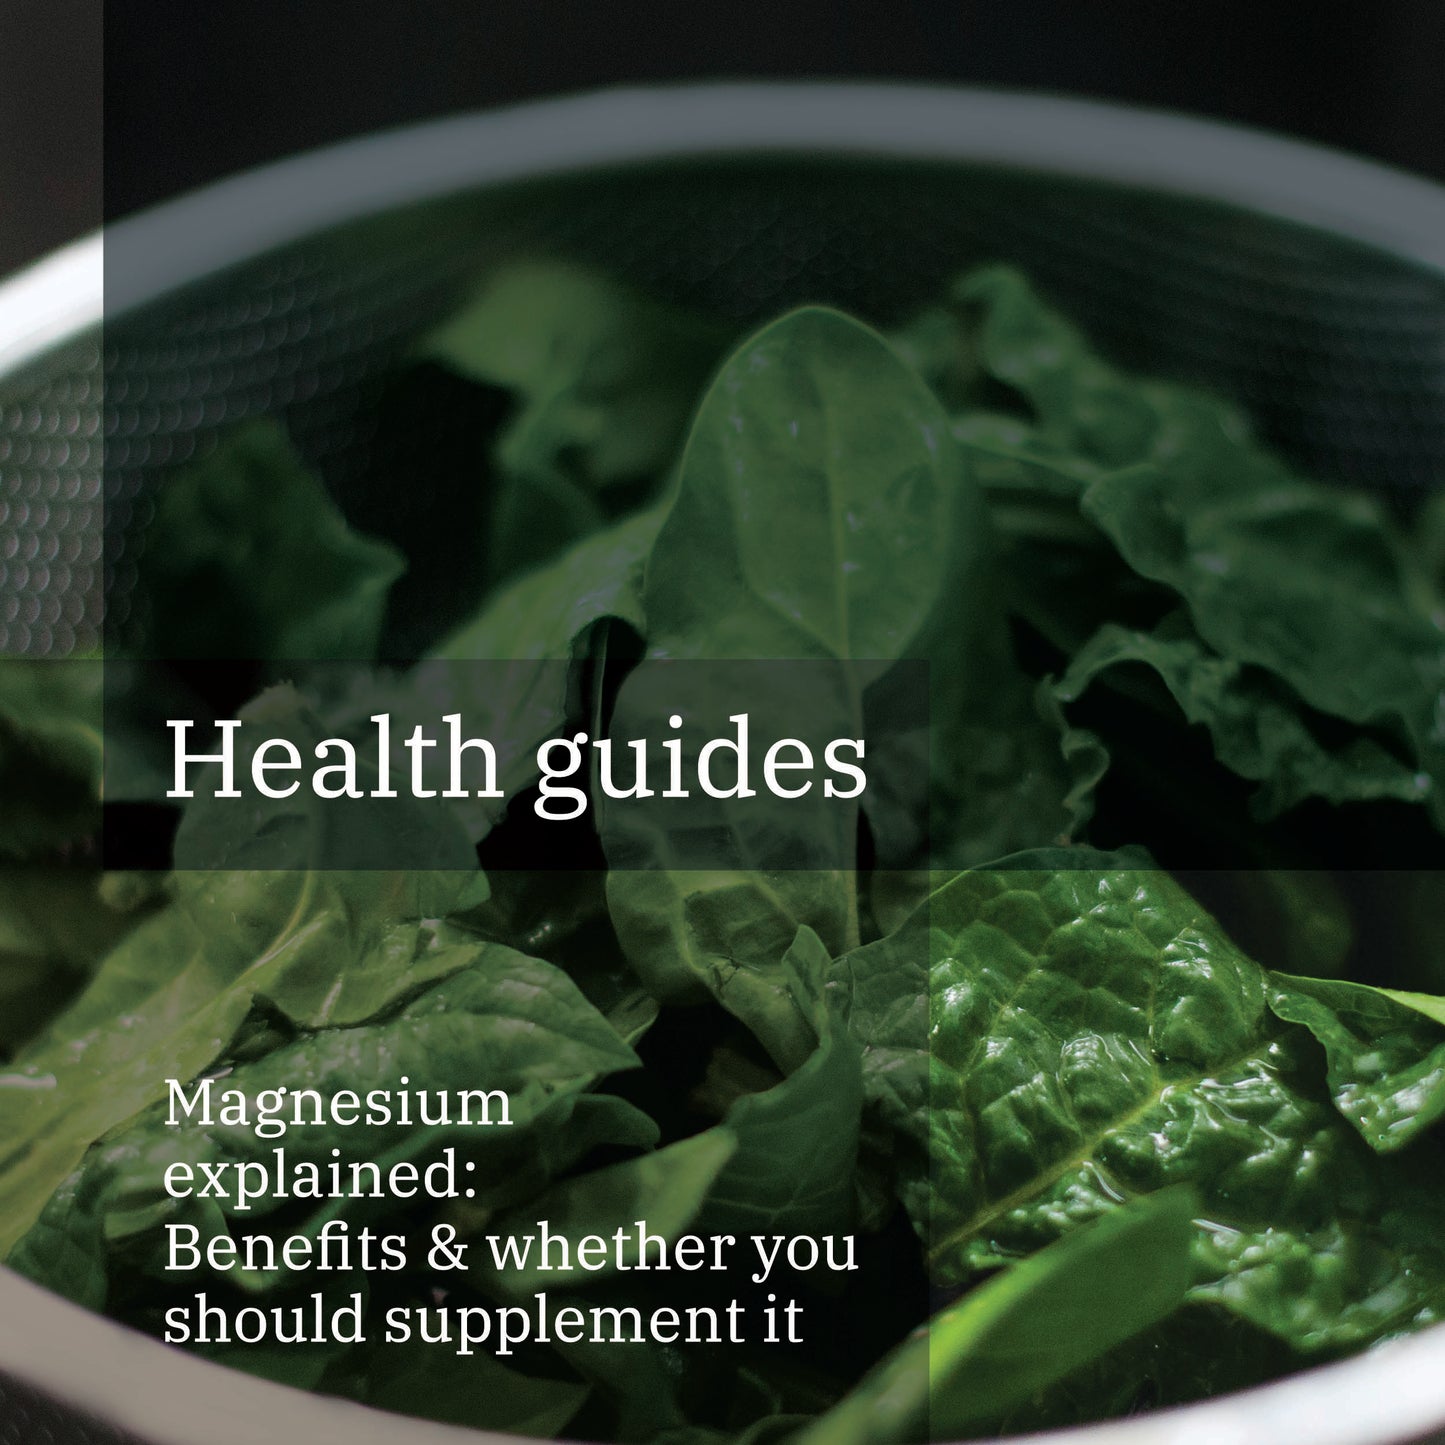 Magnesium explained: <br> Benefits & whether you should supplement it